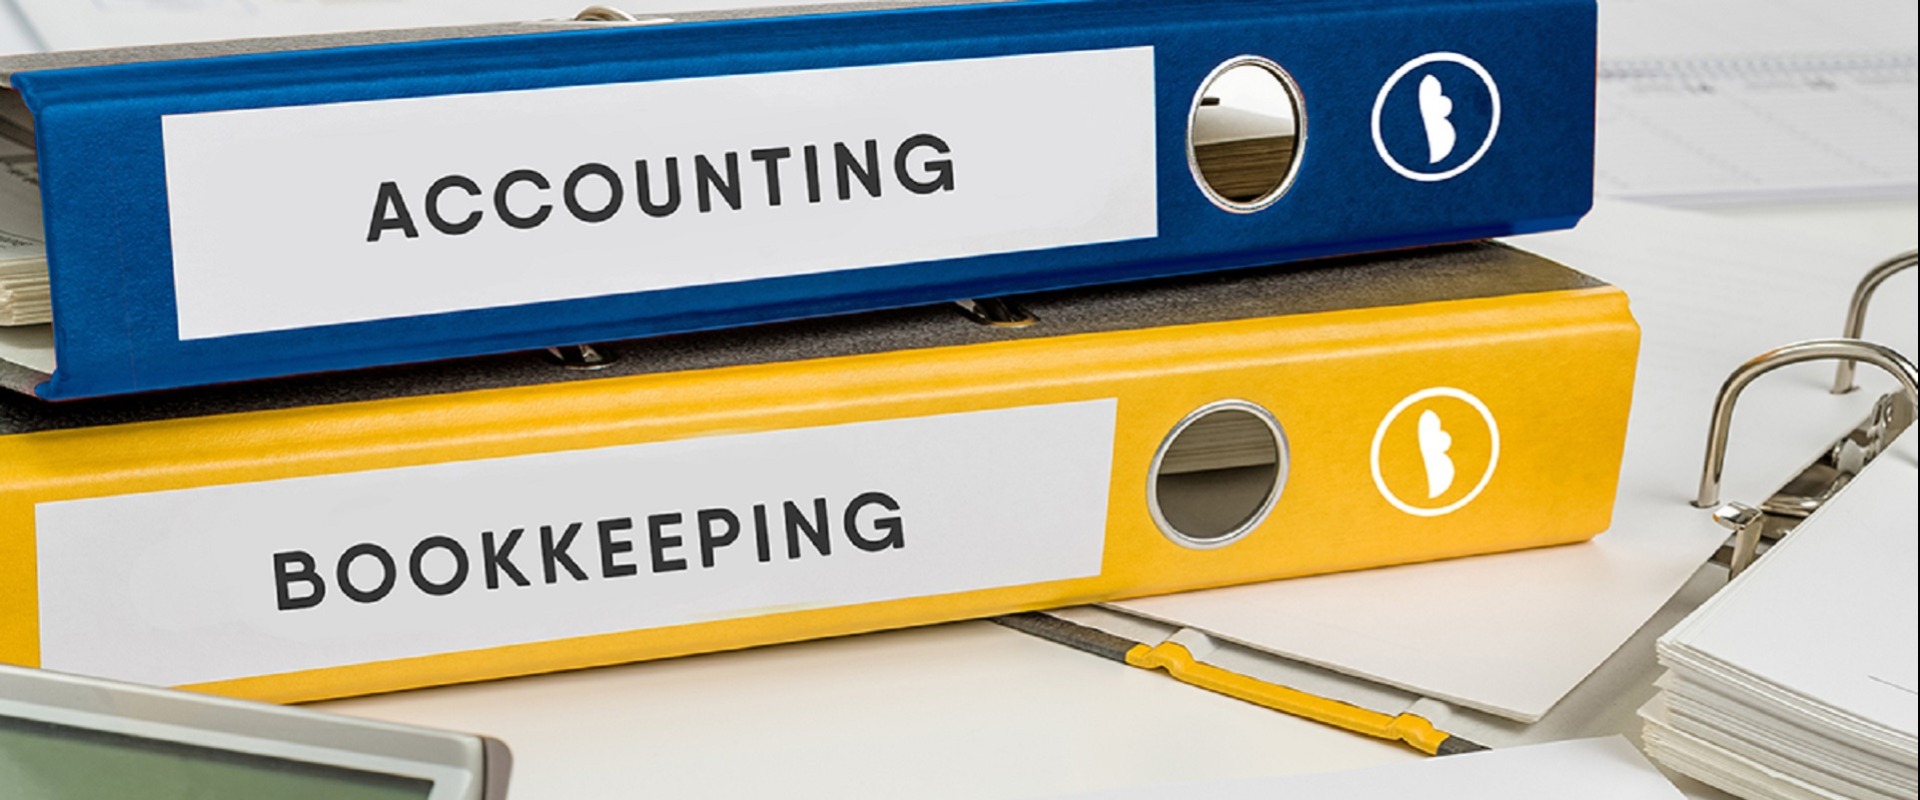 Register for the forthcoming NPCC webinar: Fundamentals of Keeping Books and Records for SMEs